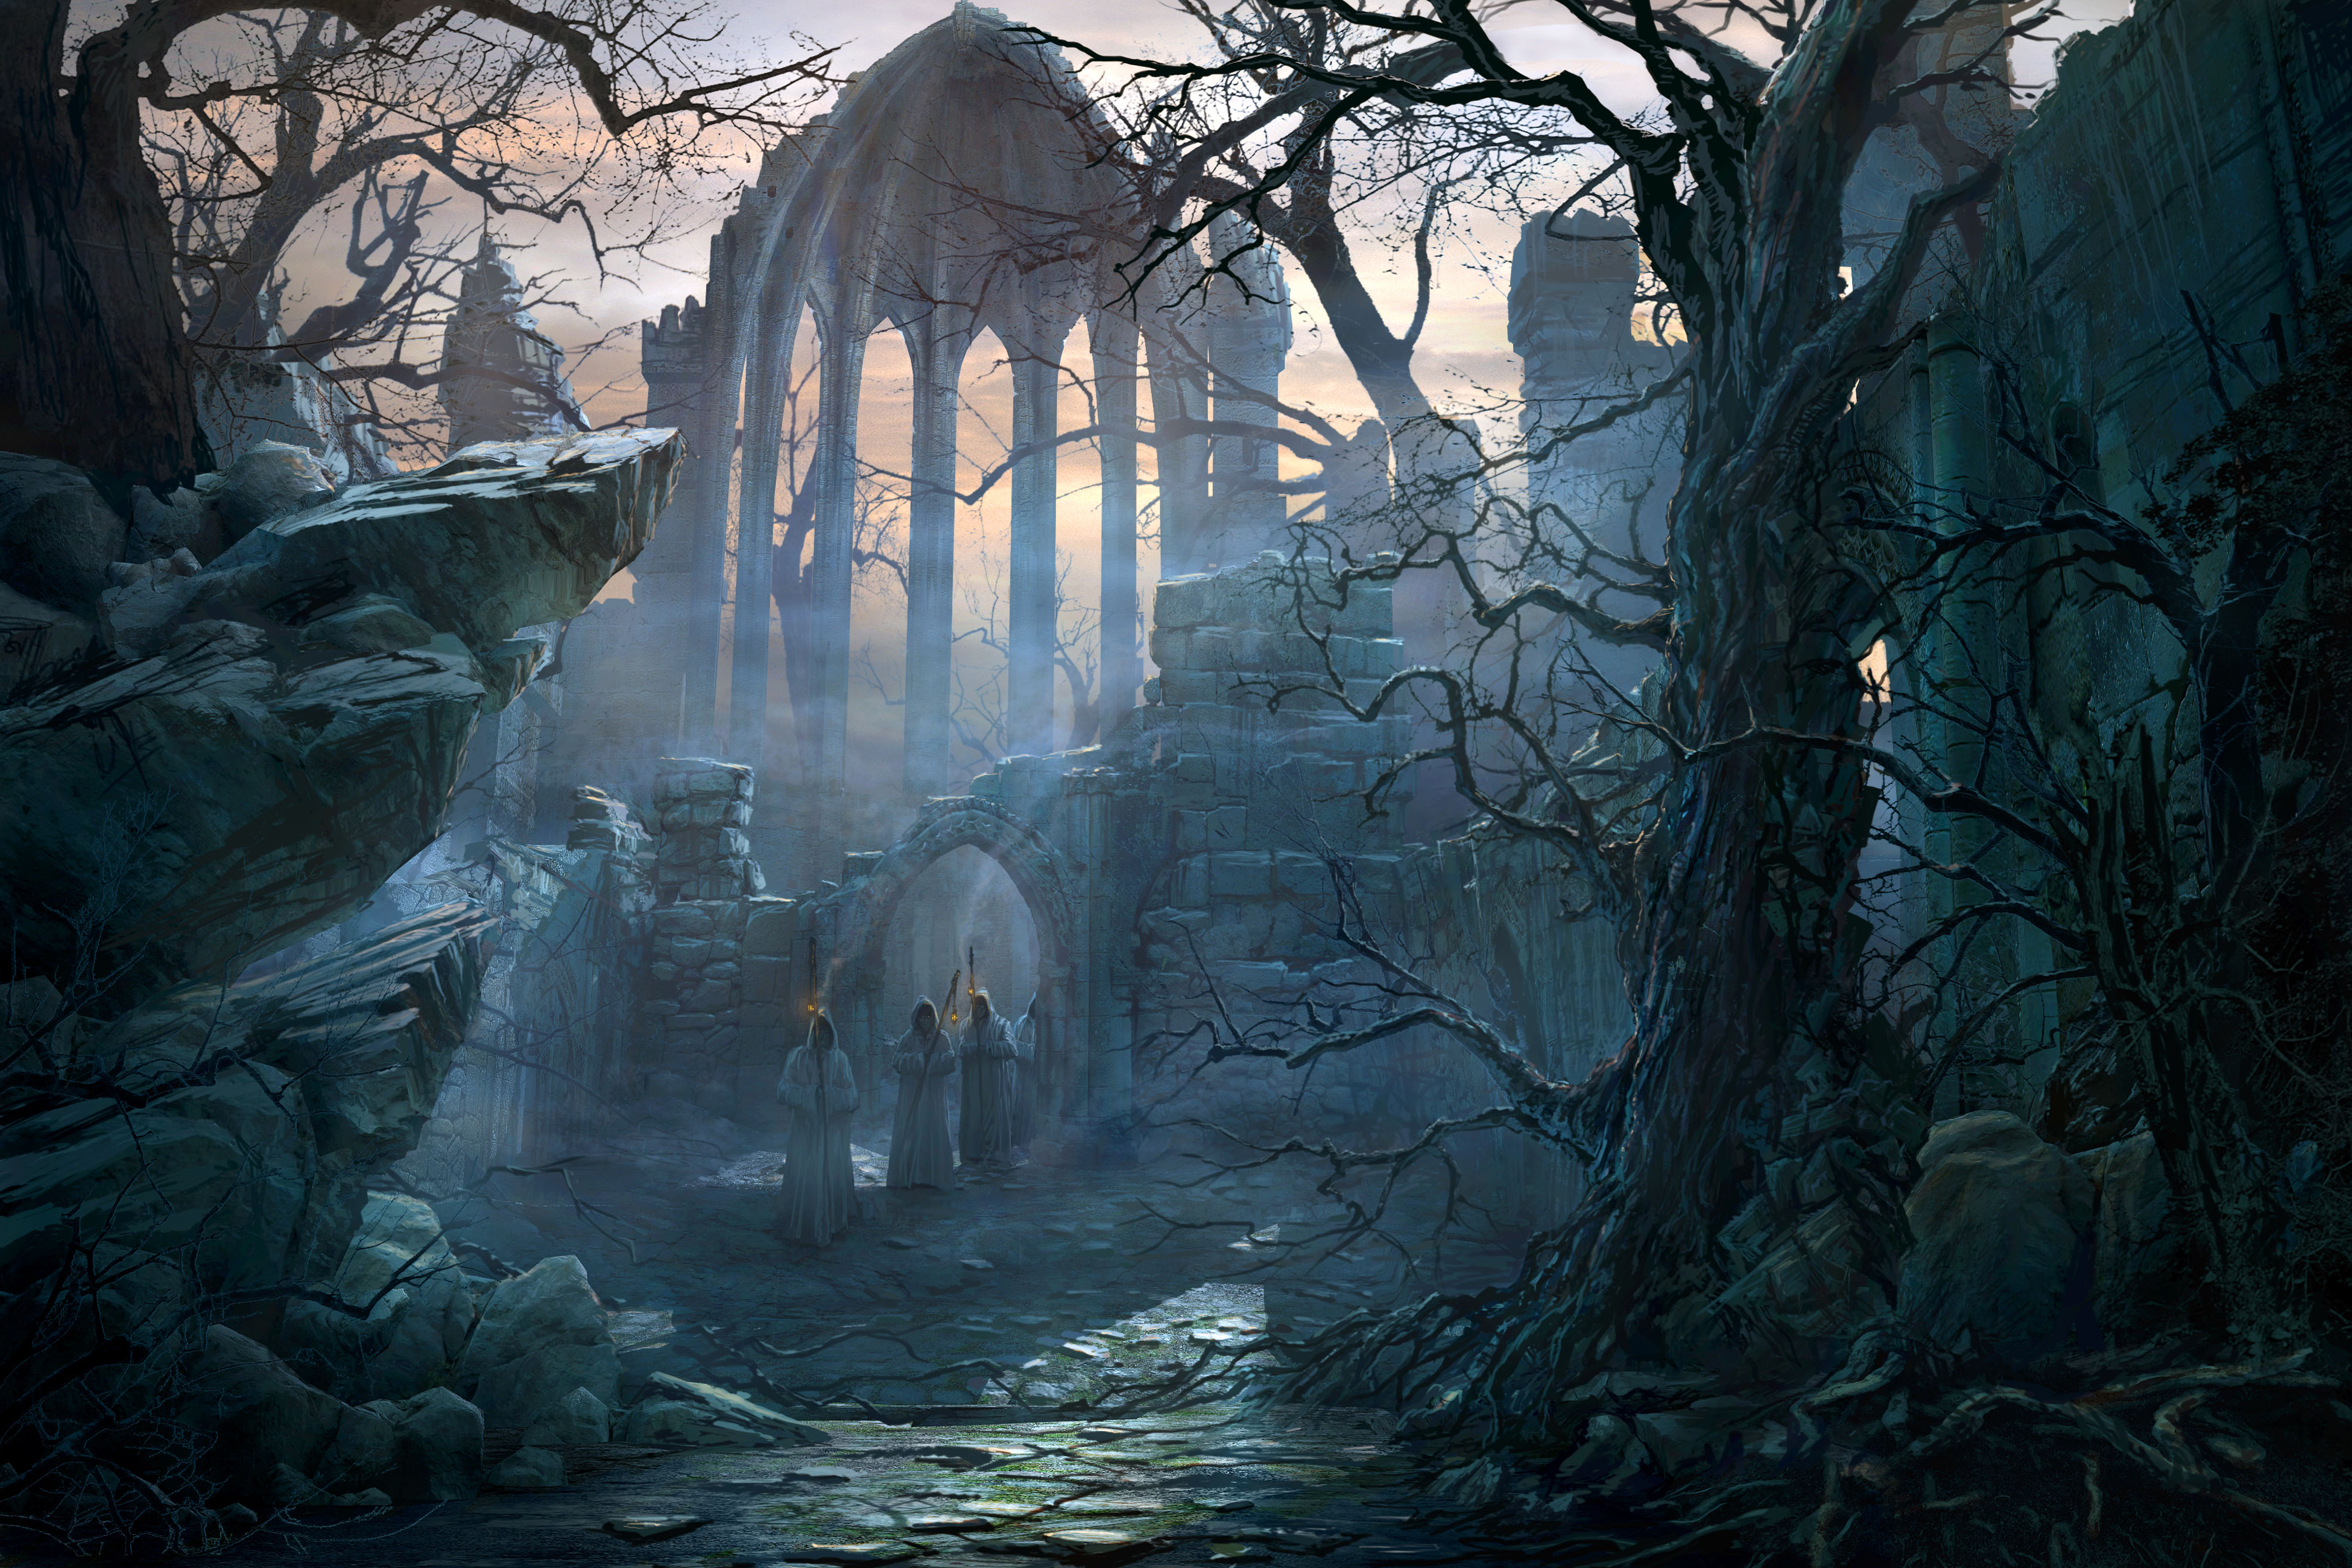 "Path to the Gothic Choir" by Rafael Lacoste